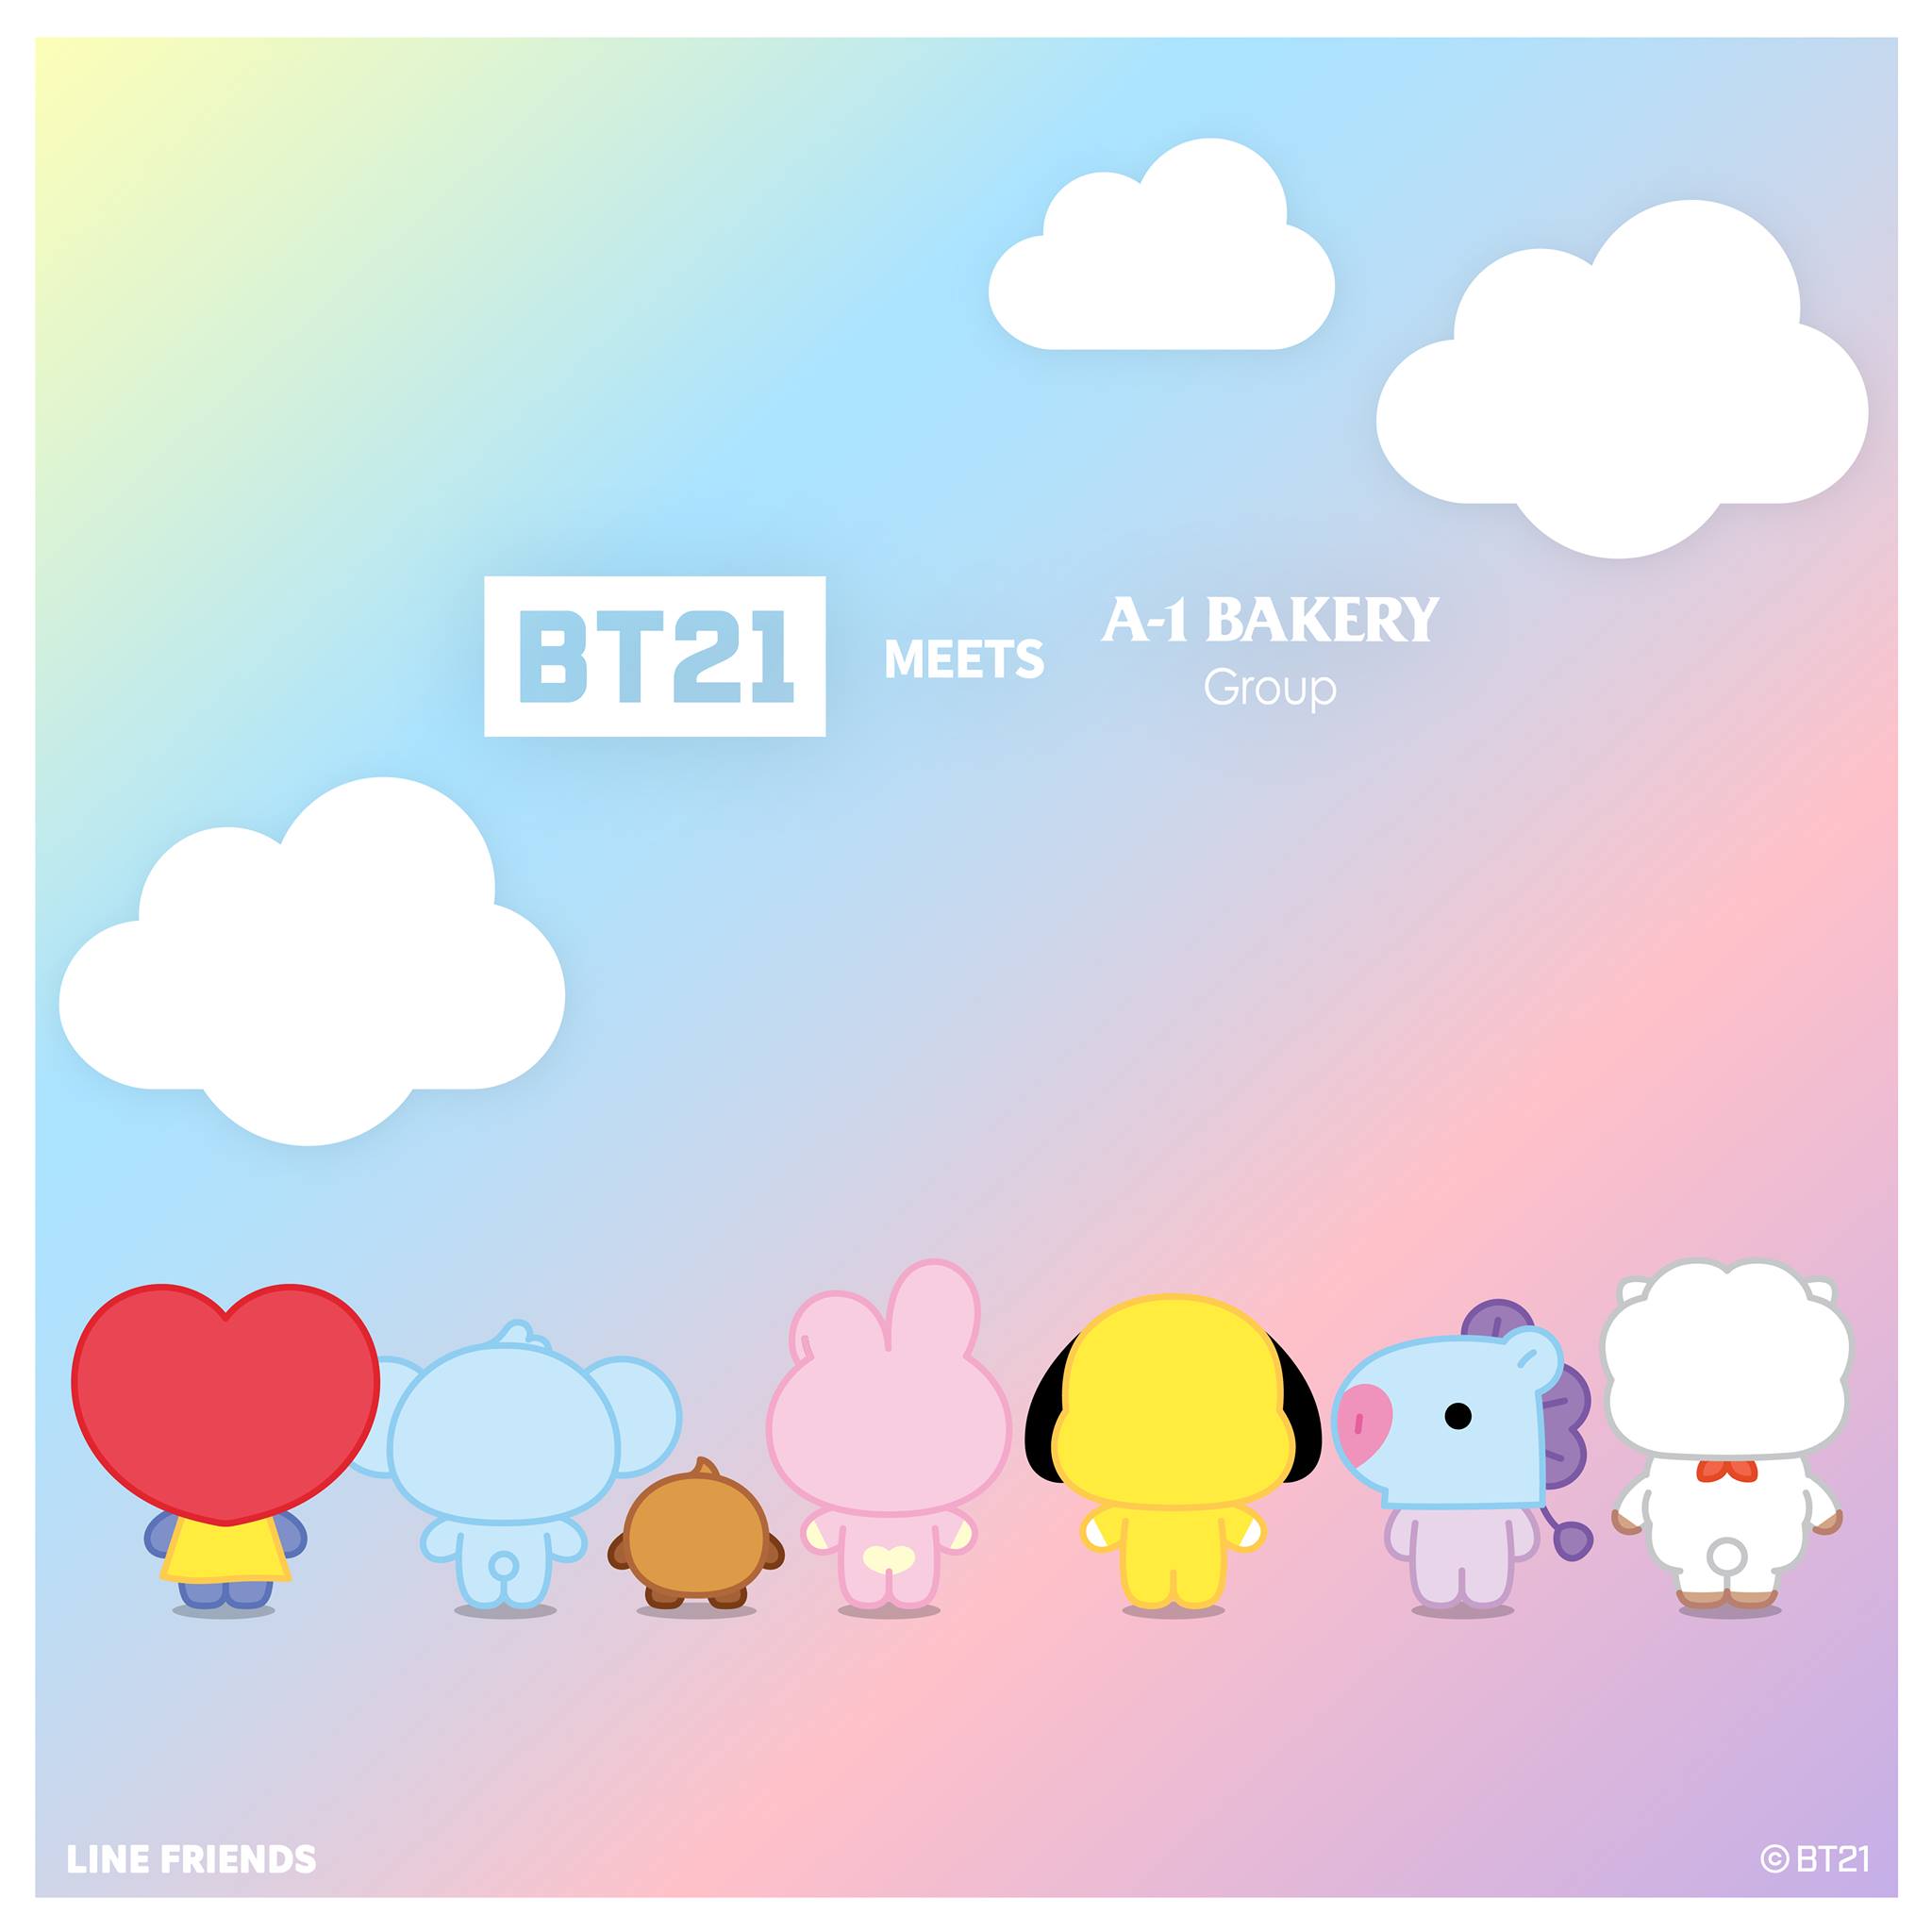 BT21 MEETS A-1 Bakery 新甜點及包點即將推出啦! LINE FRIENDS首次與 A-1 Bakery合作推出BT21 MEETS A-1 Bakery多款新甜點及包點，大家一齊估吓邊款產品會率先推出呢? 麵包? 蛋糕? 定係雪糕呢? With the first cross-over between LINE FRIENDS and A-1 Bakery, lots of attractive BT21 MEETS A-1 Bakery new items are rolling out. Which products will be launched first? Come and make a guess together! Bread? Cake or ice-cream? ... 官方Instagram 【Official IG】: a1bakeryhk @linefriendshk